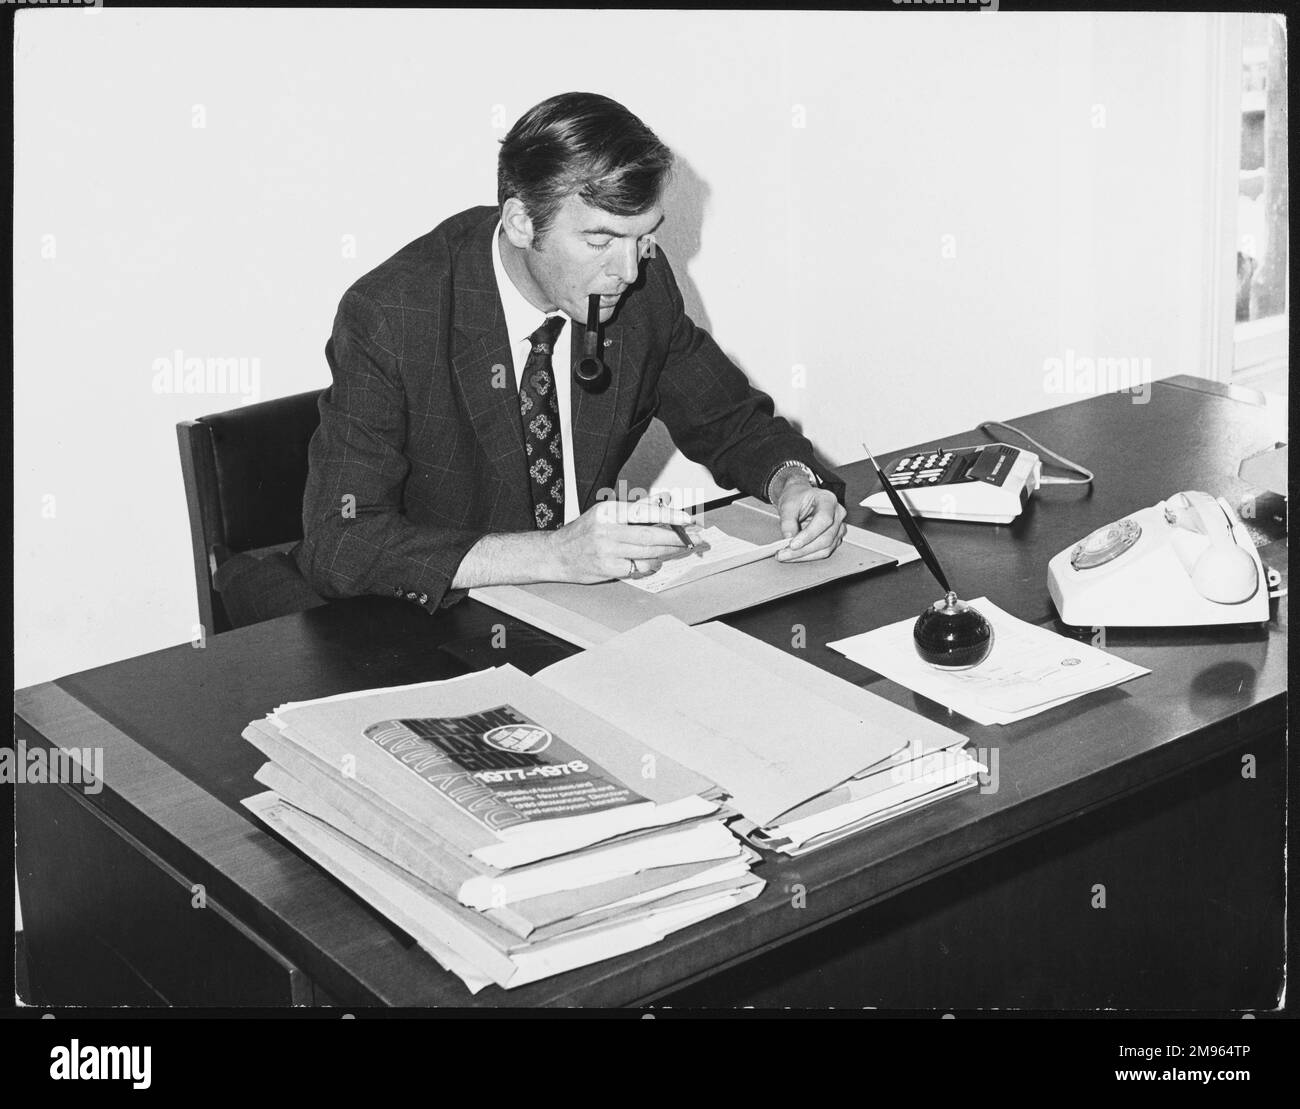 'The Boss' smoking a pipe and reading a letter, piles of files, a telephone and calculator on his desk. Stock Photo